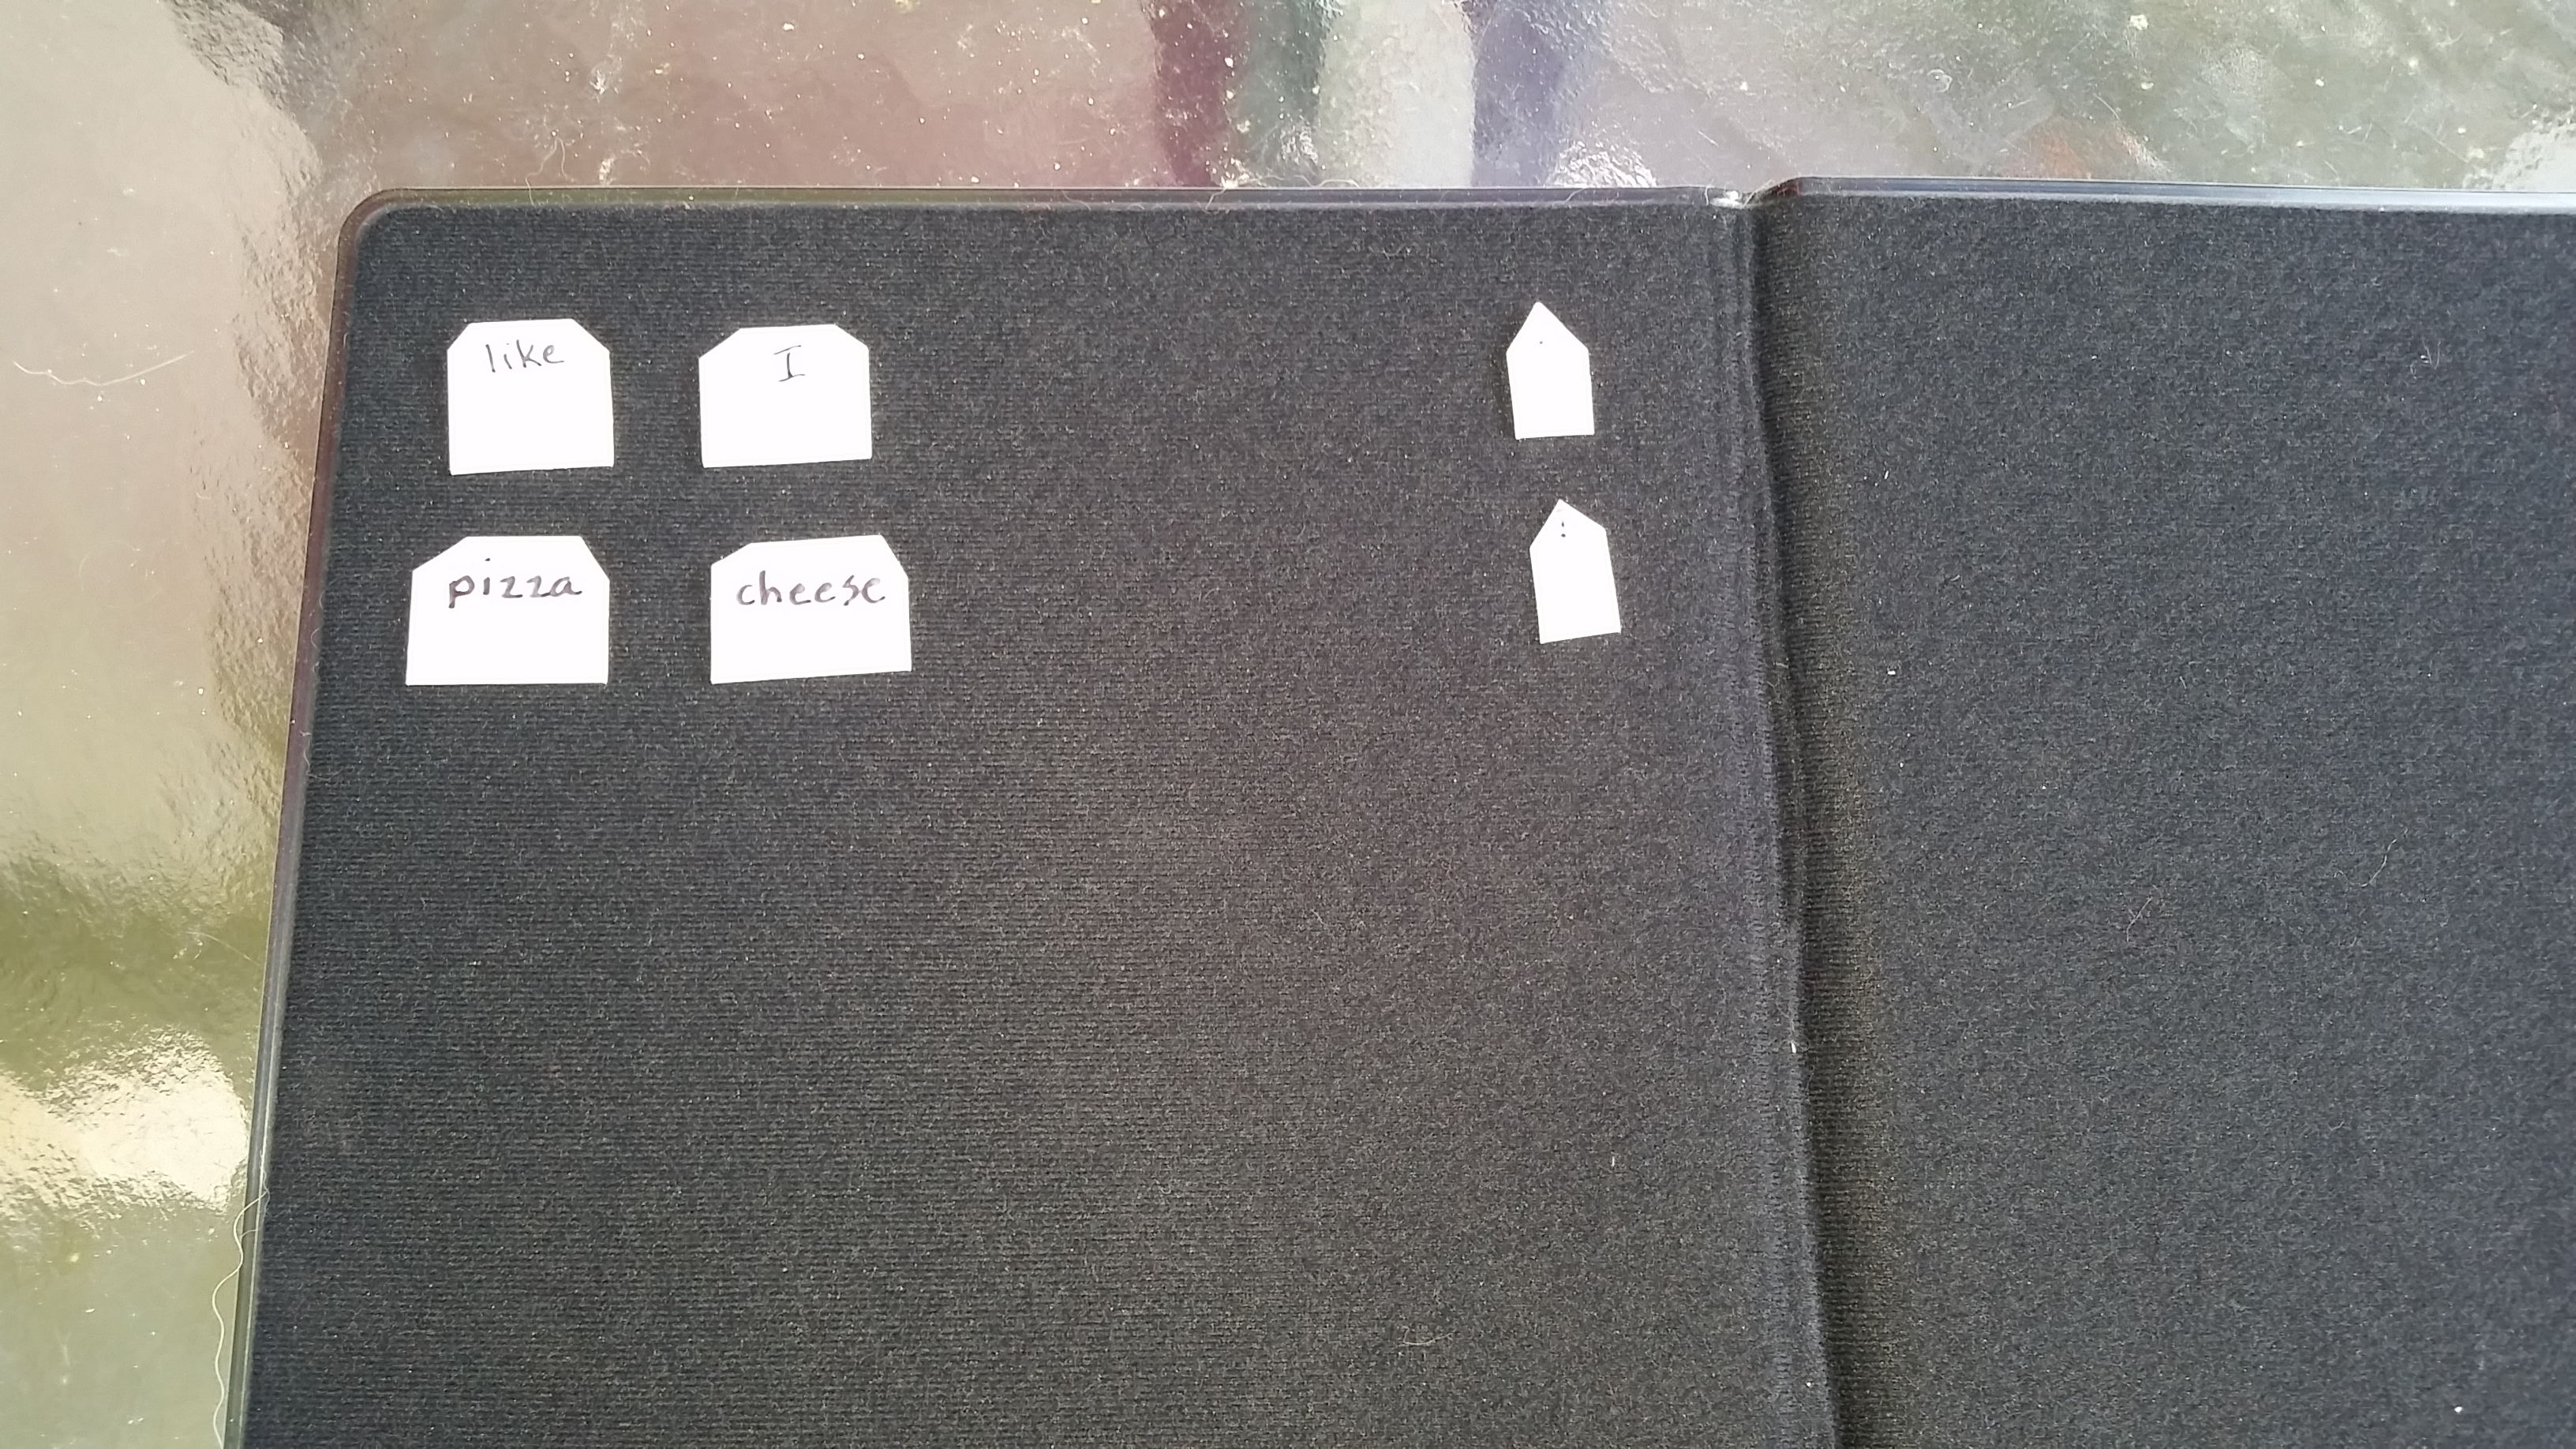 The braille words I, cheese, pizza, and like and a period are on small plastic tiles on a black felt board from APH.